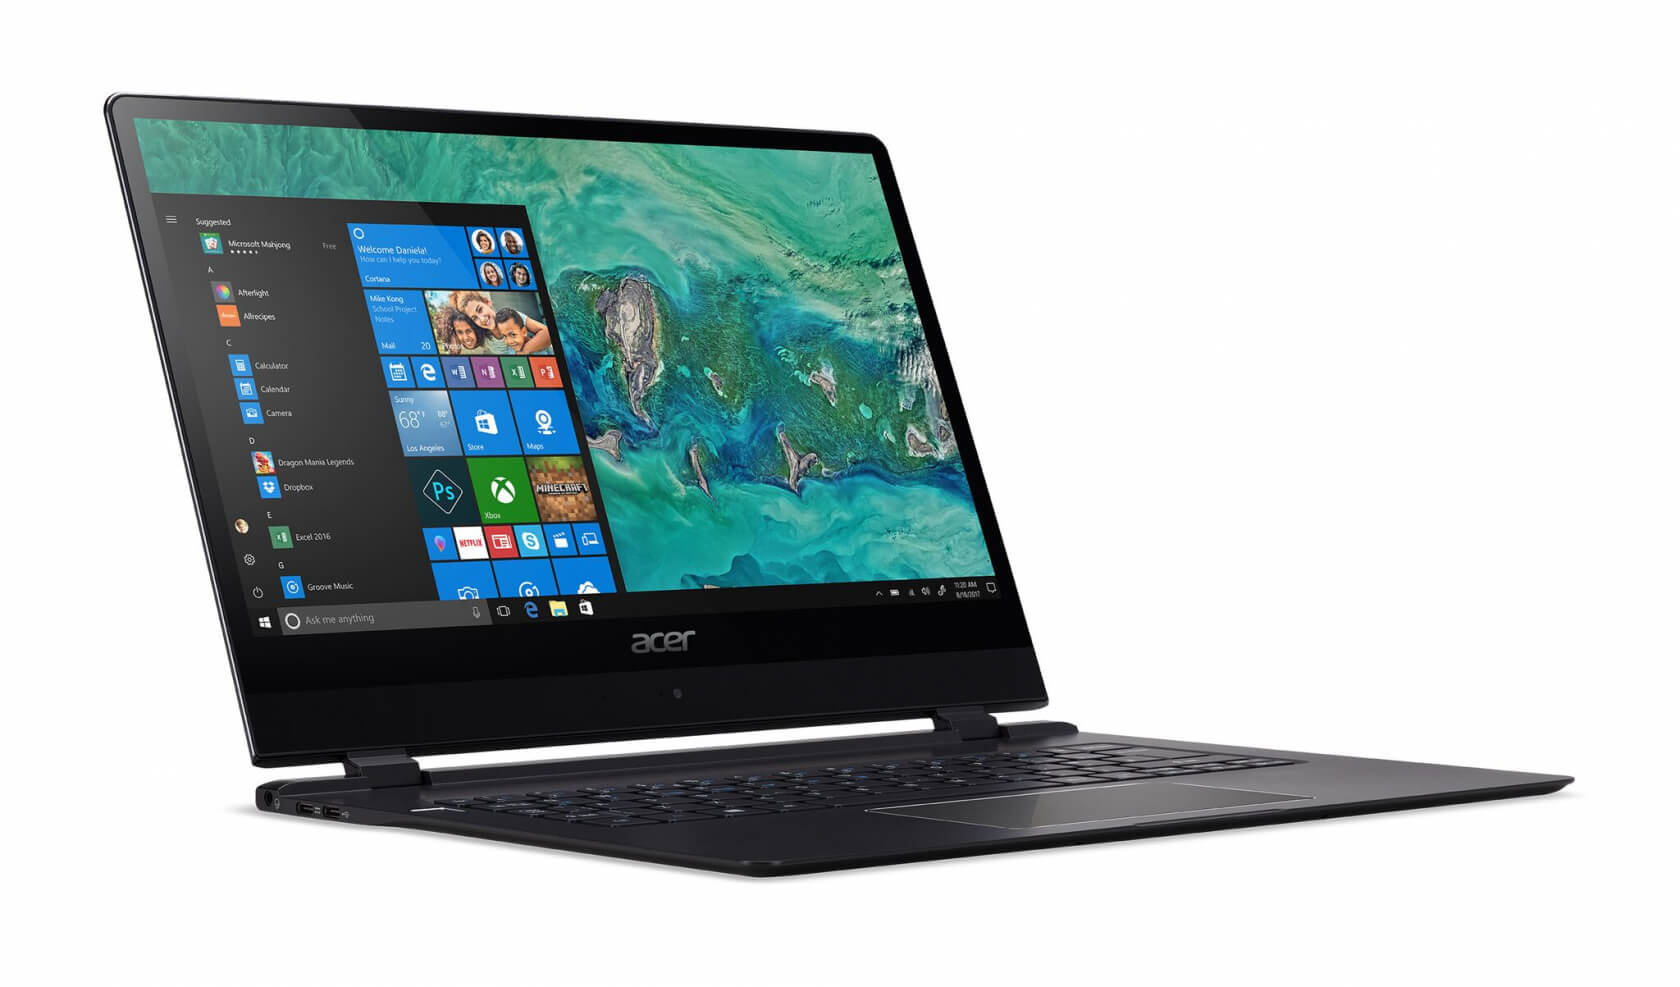 Acer's updated laptops include the thinnest computer in the world